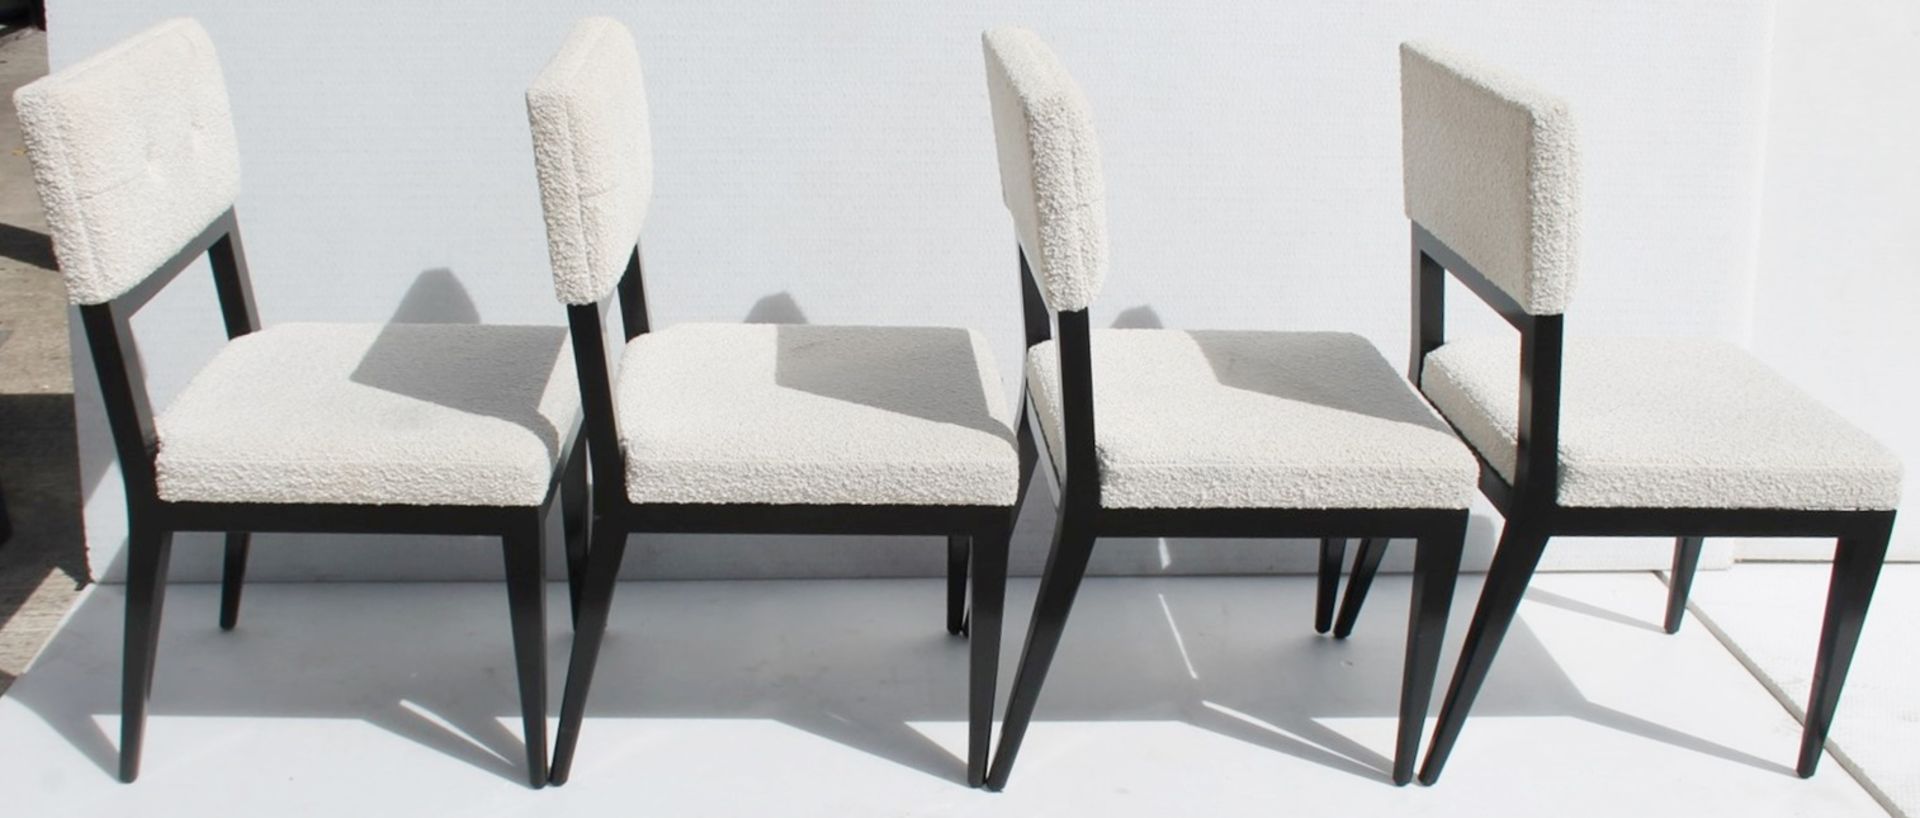 8 x AMY SOMERVILLE LONDON 'Resplendent' Bespoke Dining Chairs - Total Original Price £25,920 - Image 14 of 18